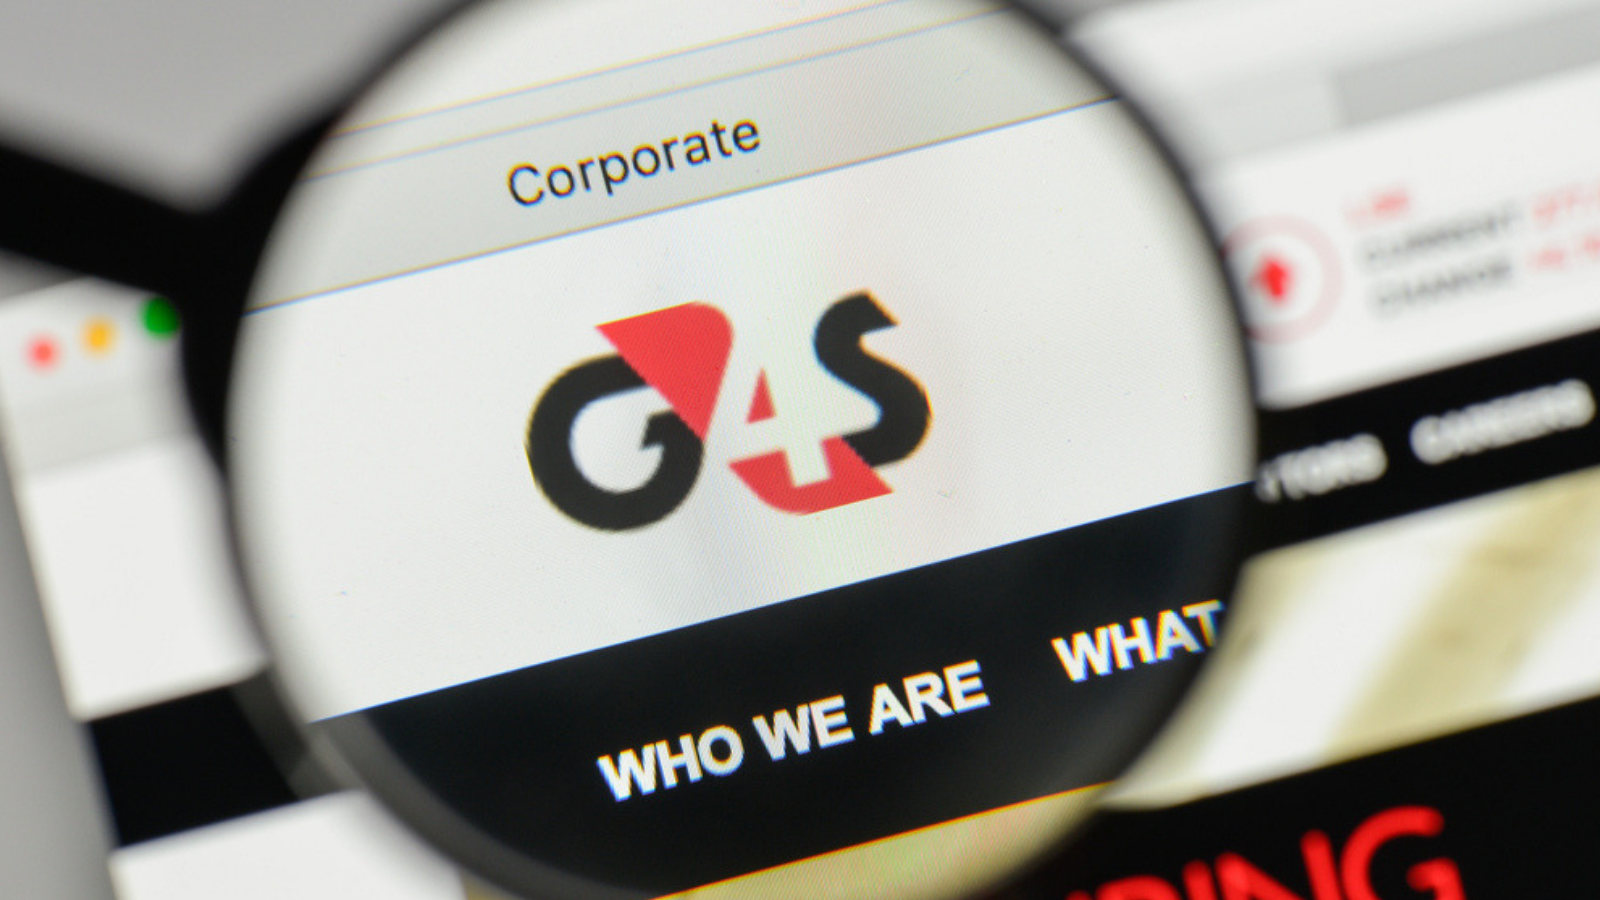 g4s-offline-storage-security-cryptocurrency-bitcoin-news-altcoinbuzz-investing-ethereum-crypto-blockchain.png